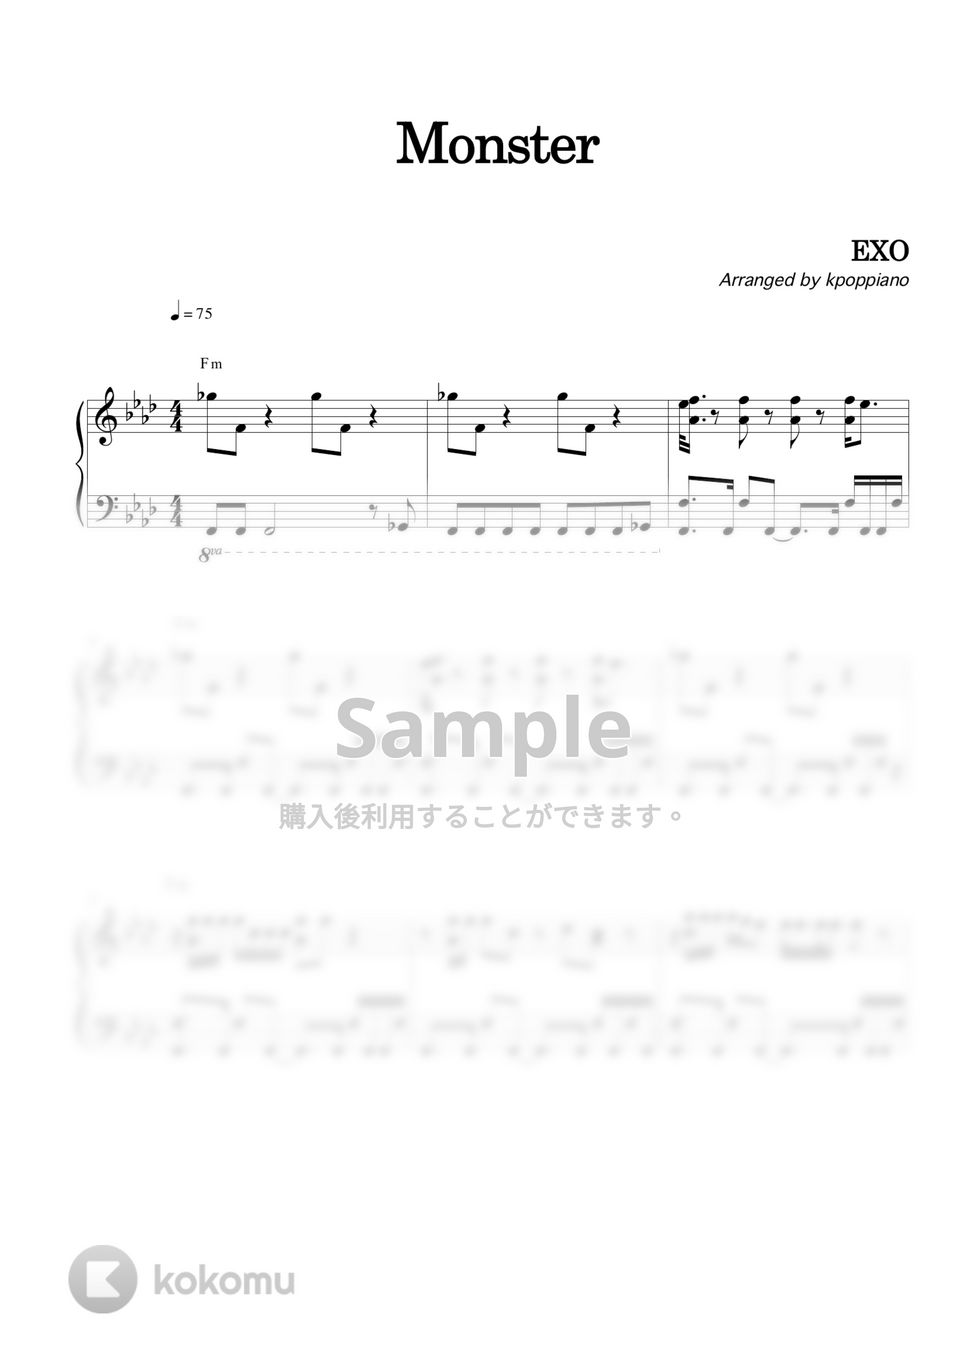 EXO - Monster by KPOP PIANO